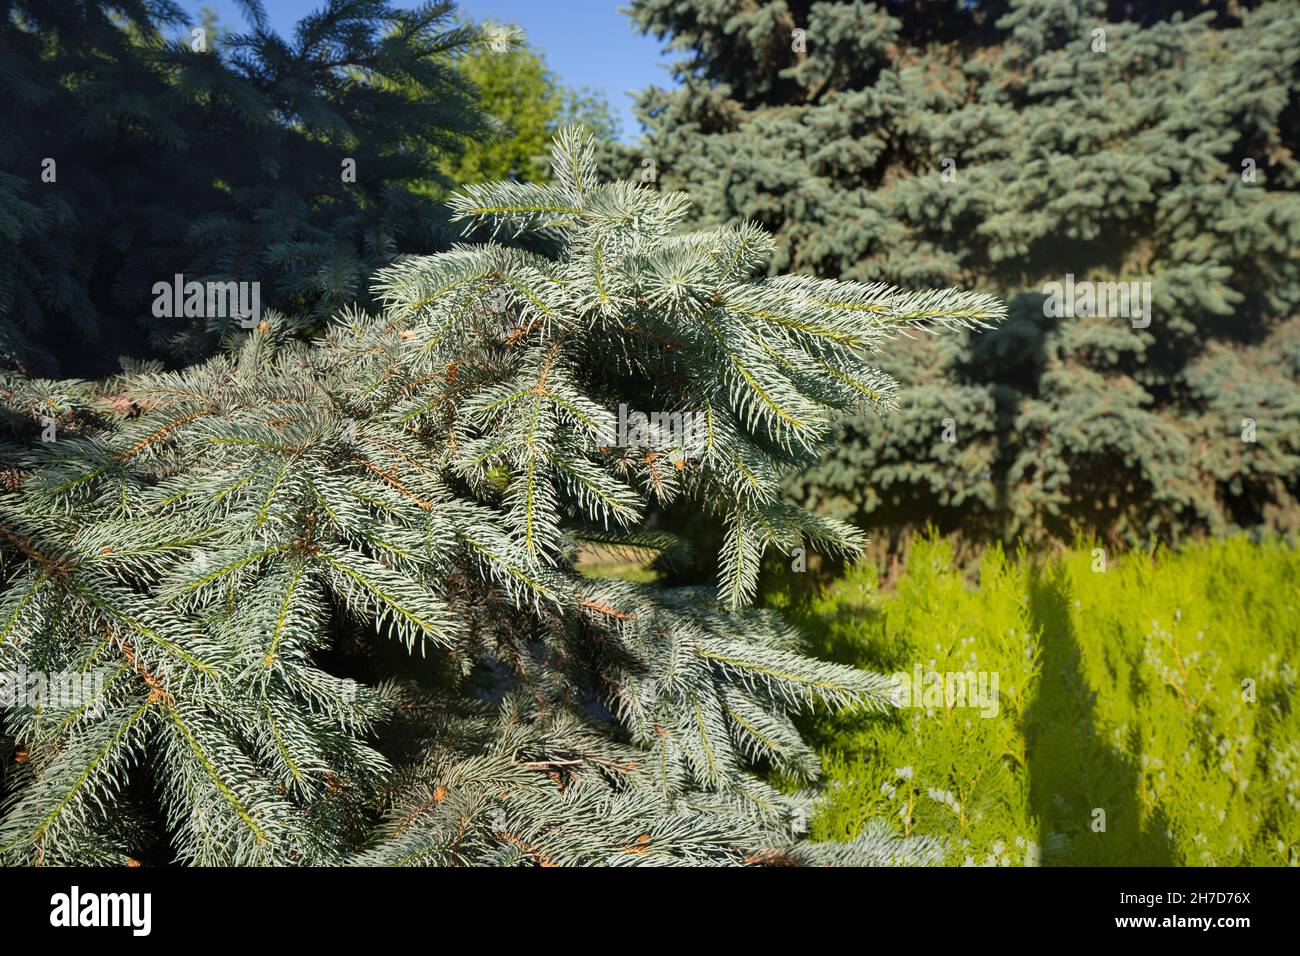 Blue spruce or Picea pungens branches with needles in a natural park as a background Stock Photo